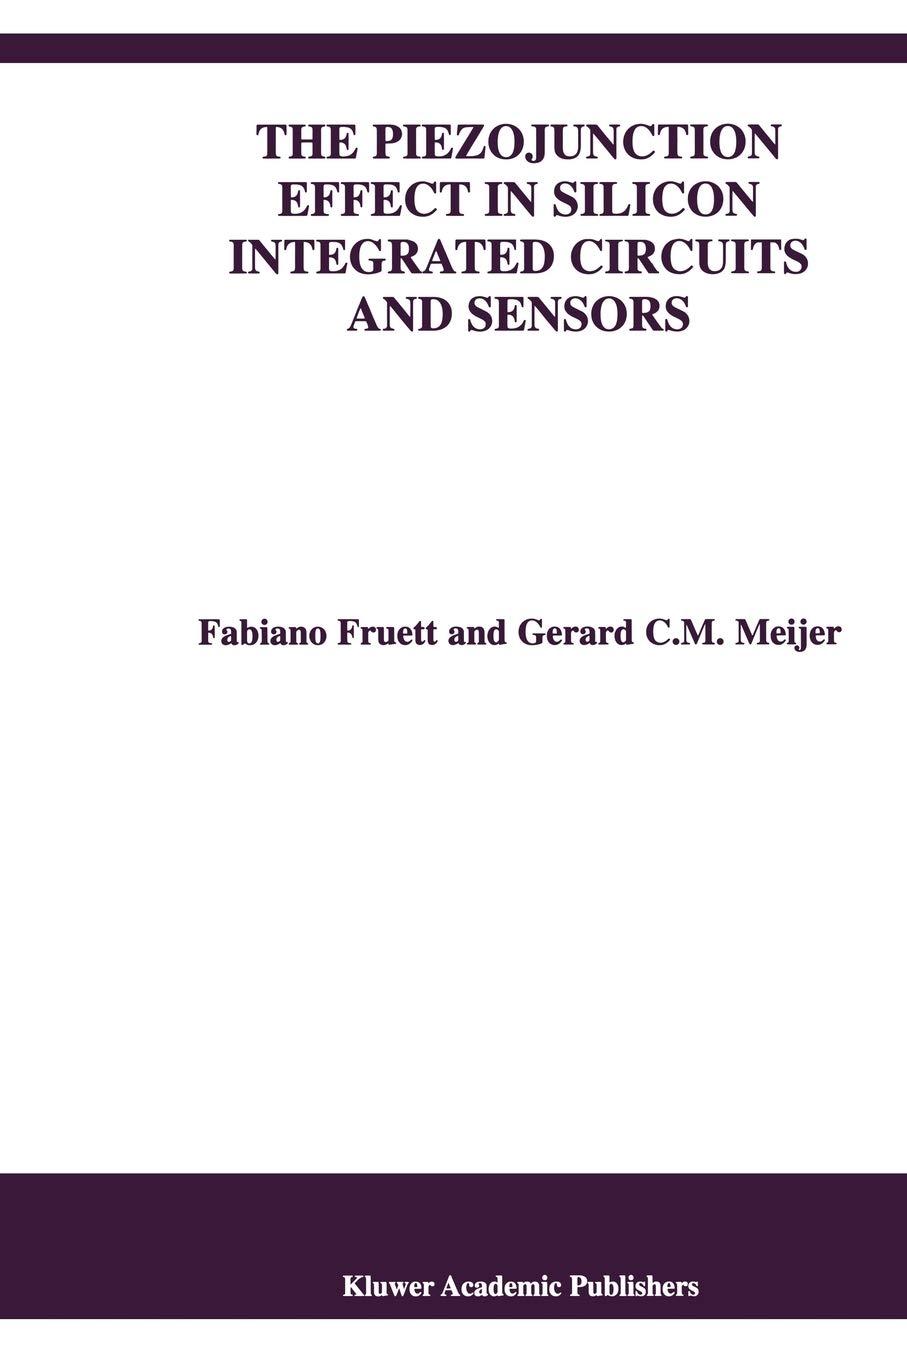 the piezojunction effect in silicon integrated circuits and sensors 2002 edition fabiano fruett, gerard c.m.